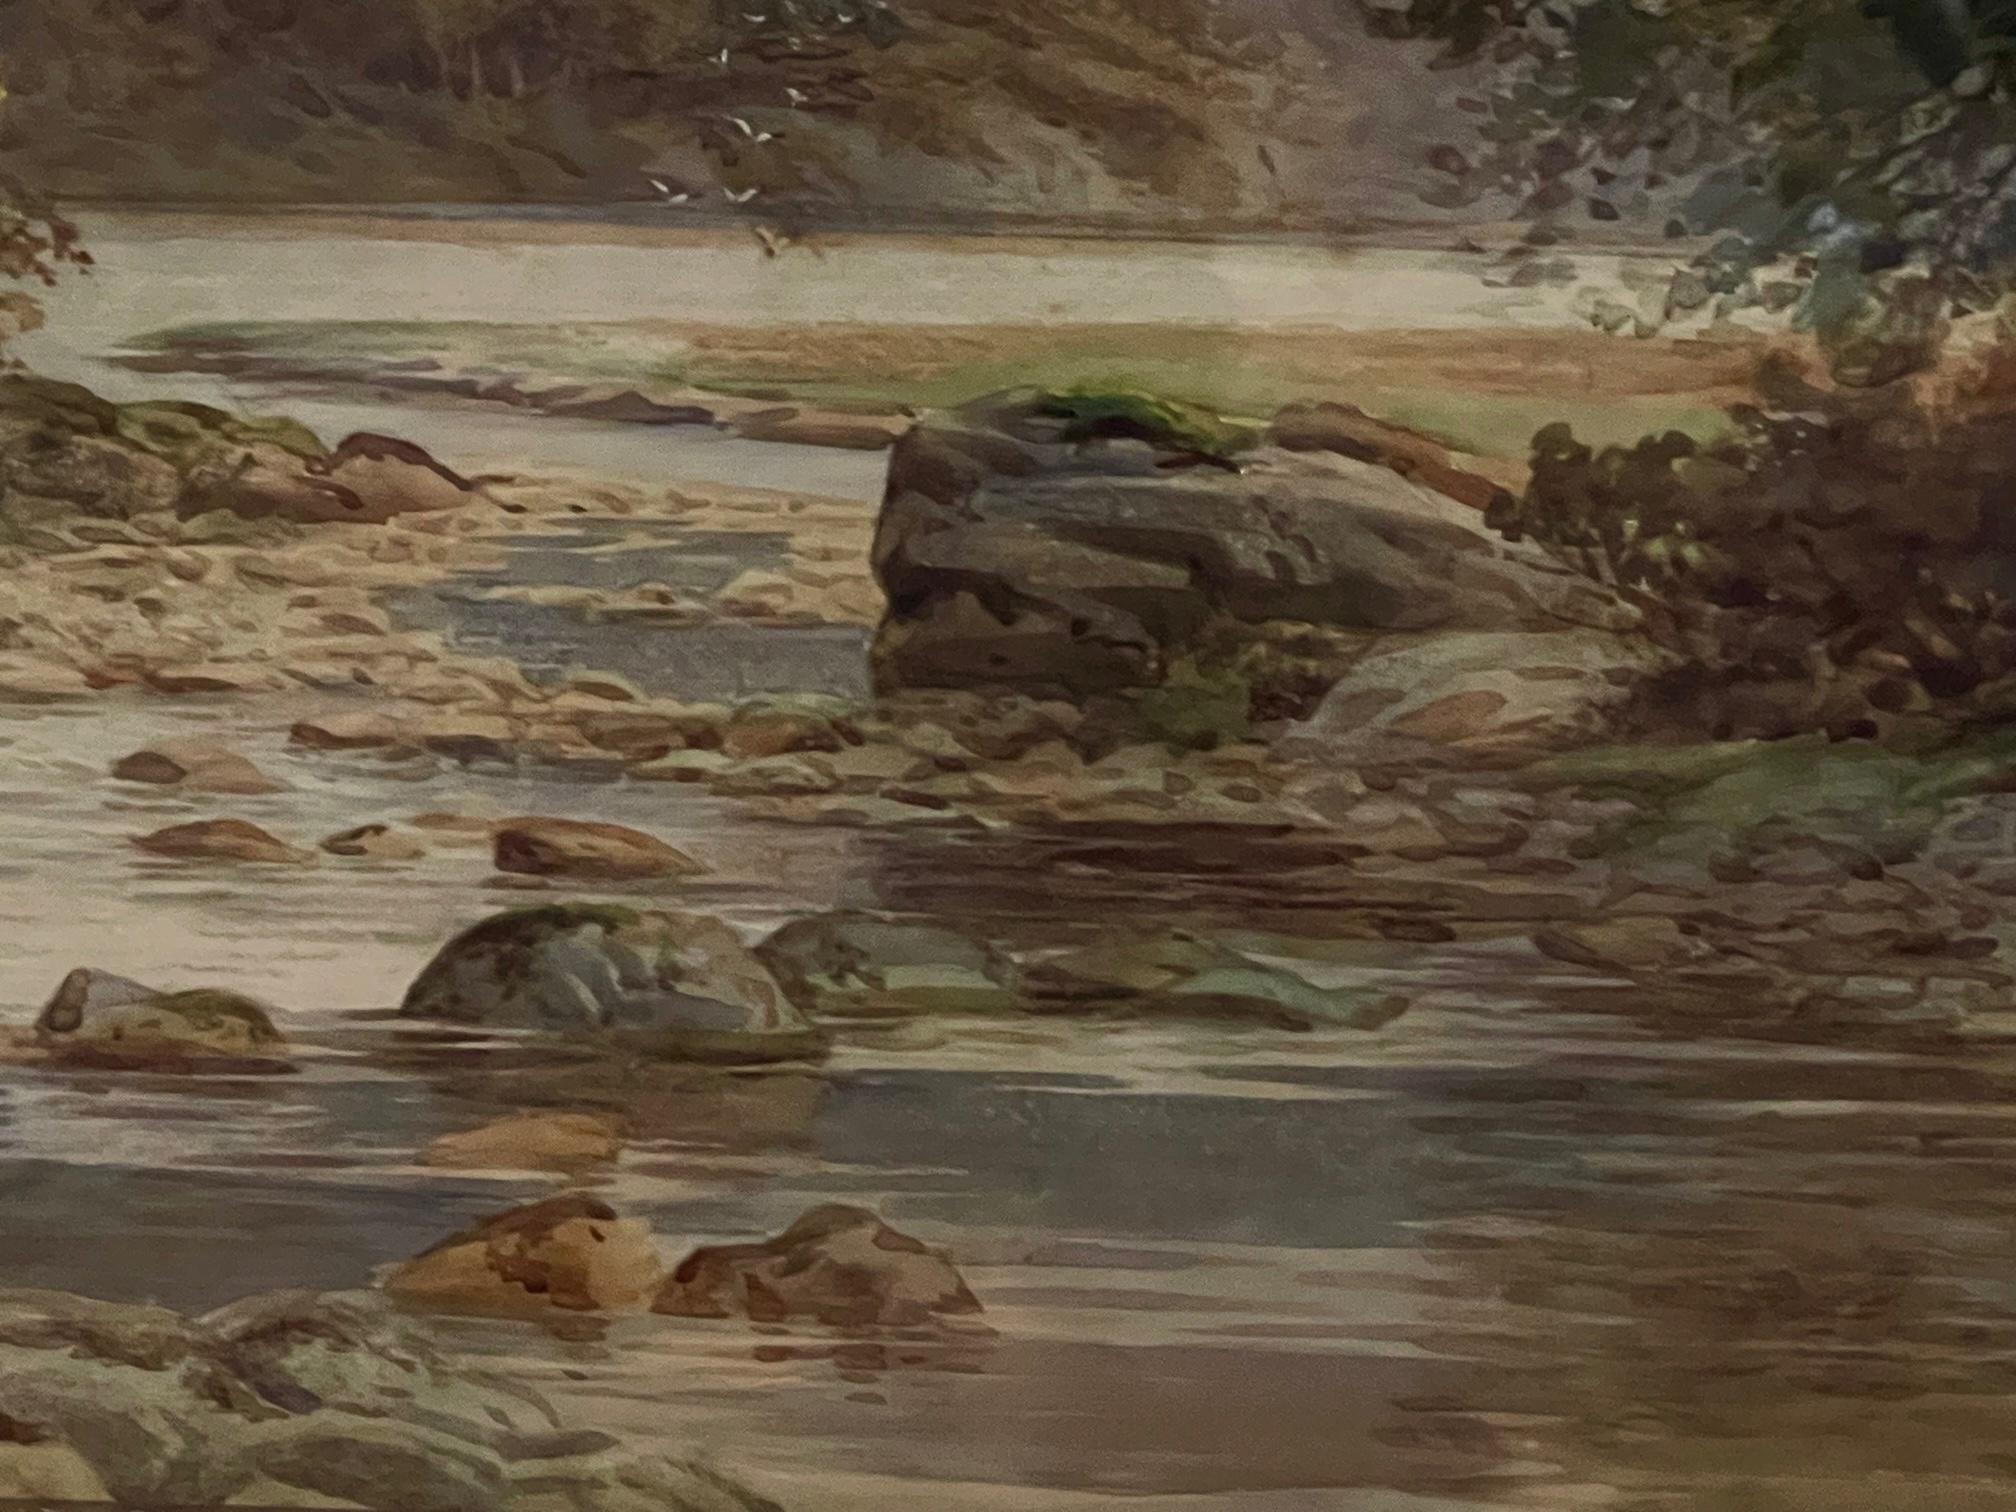 Lovely 19th century watercolor painting with an angler in a mountain stream landscape painting, this is signed William Bradley with a place and date on the lower left hand corner. Mists fall over the central mountain rising above the stream with